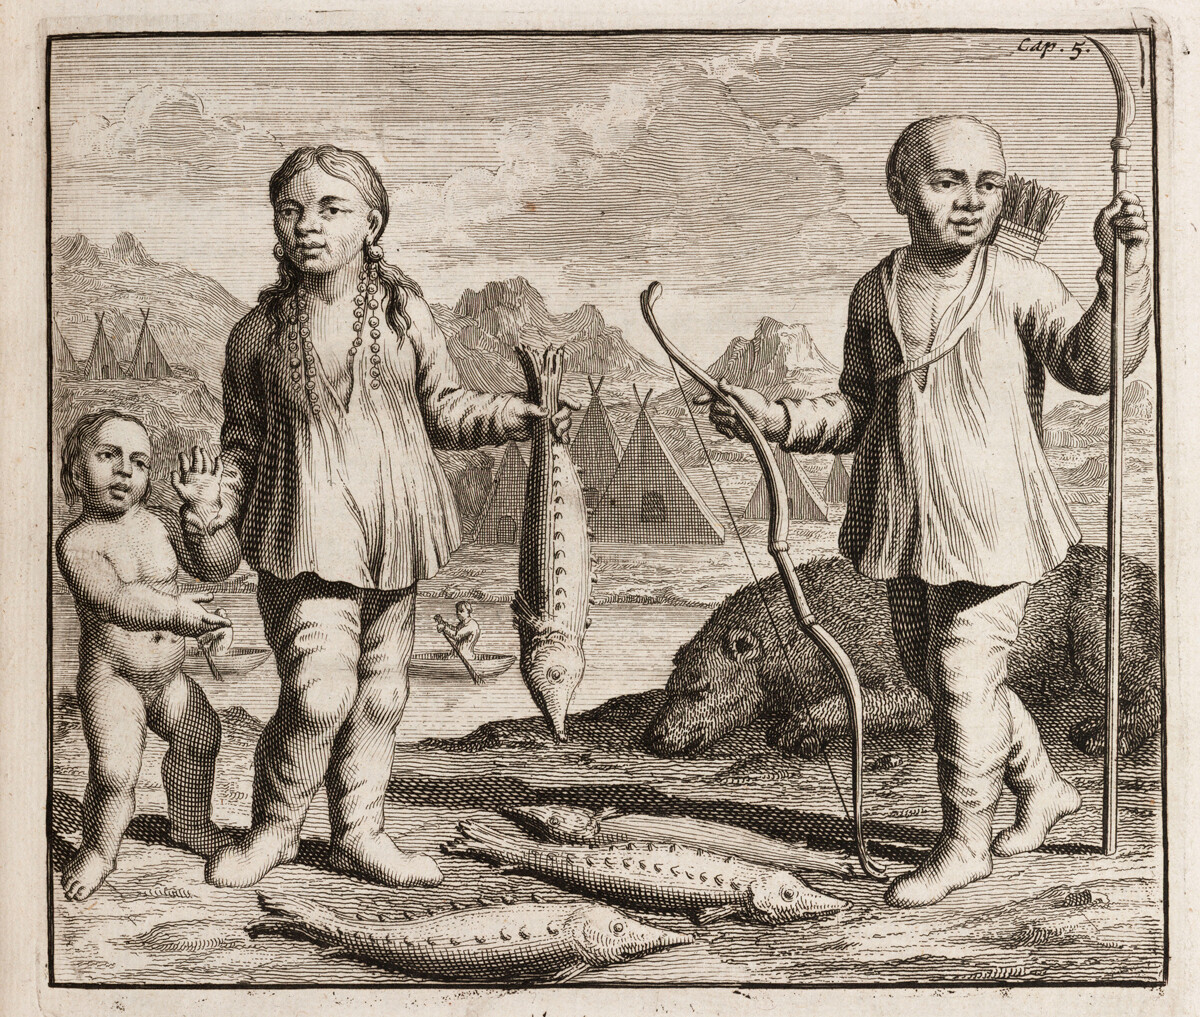 Engraving showing a family of indigenous people, possibly from Siberia. In the background is a recently killed bear. 